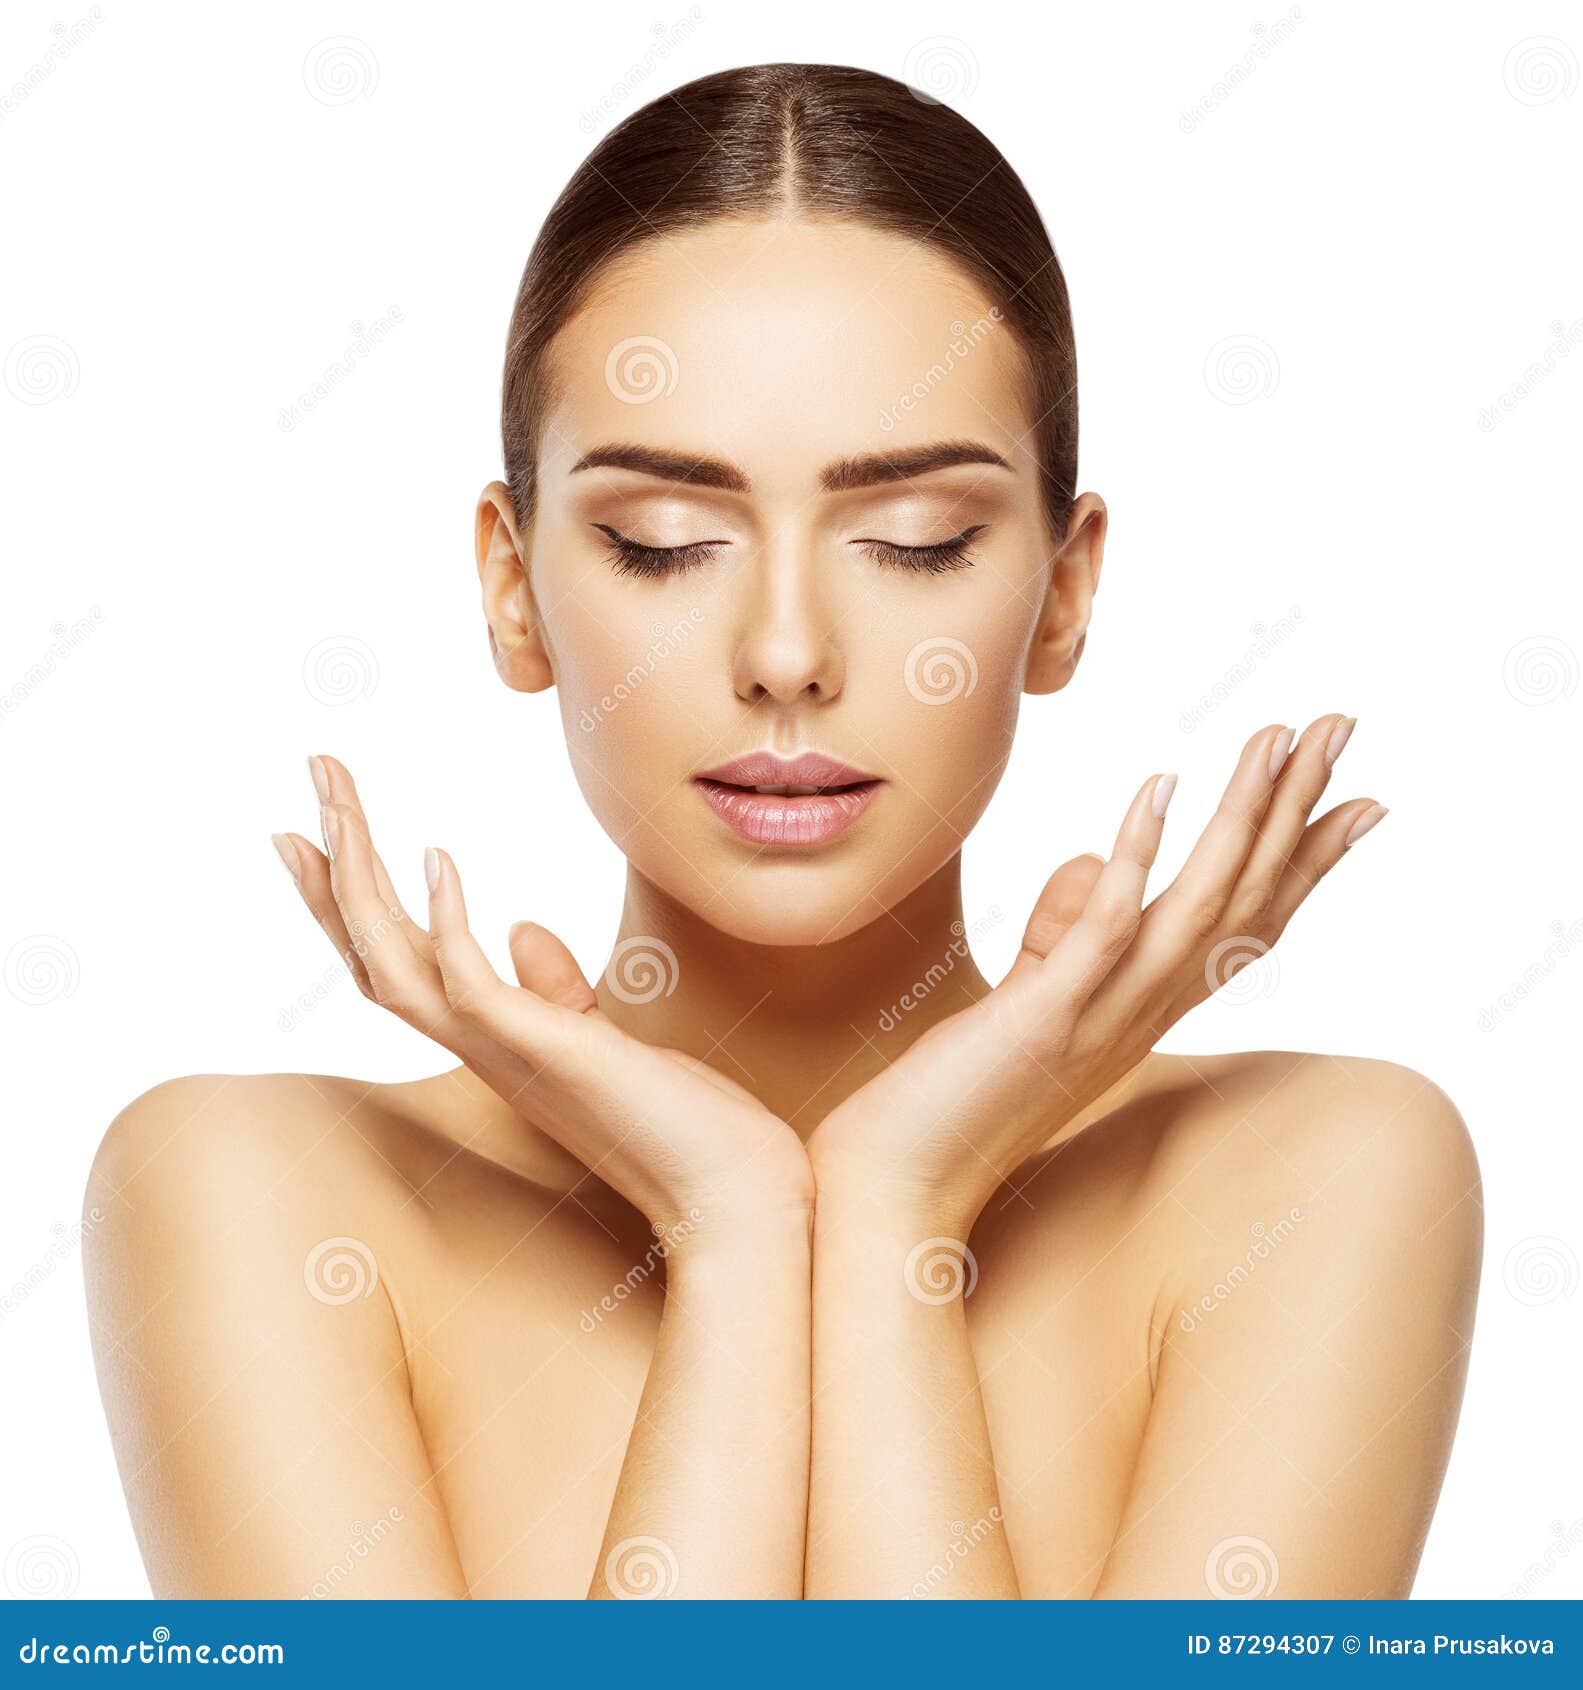 woman face hands beauty, skin care makeup eyes closed, make up